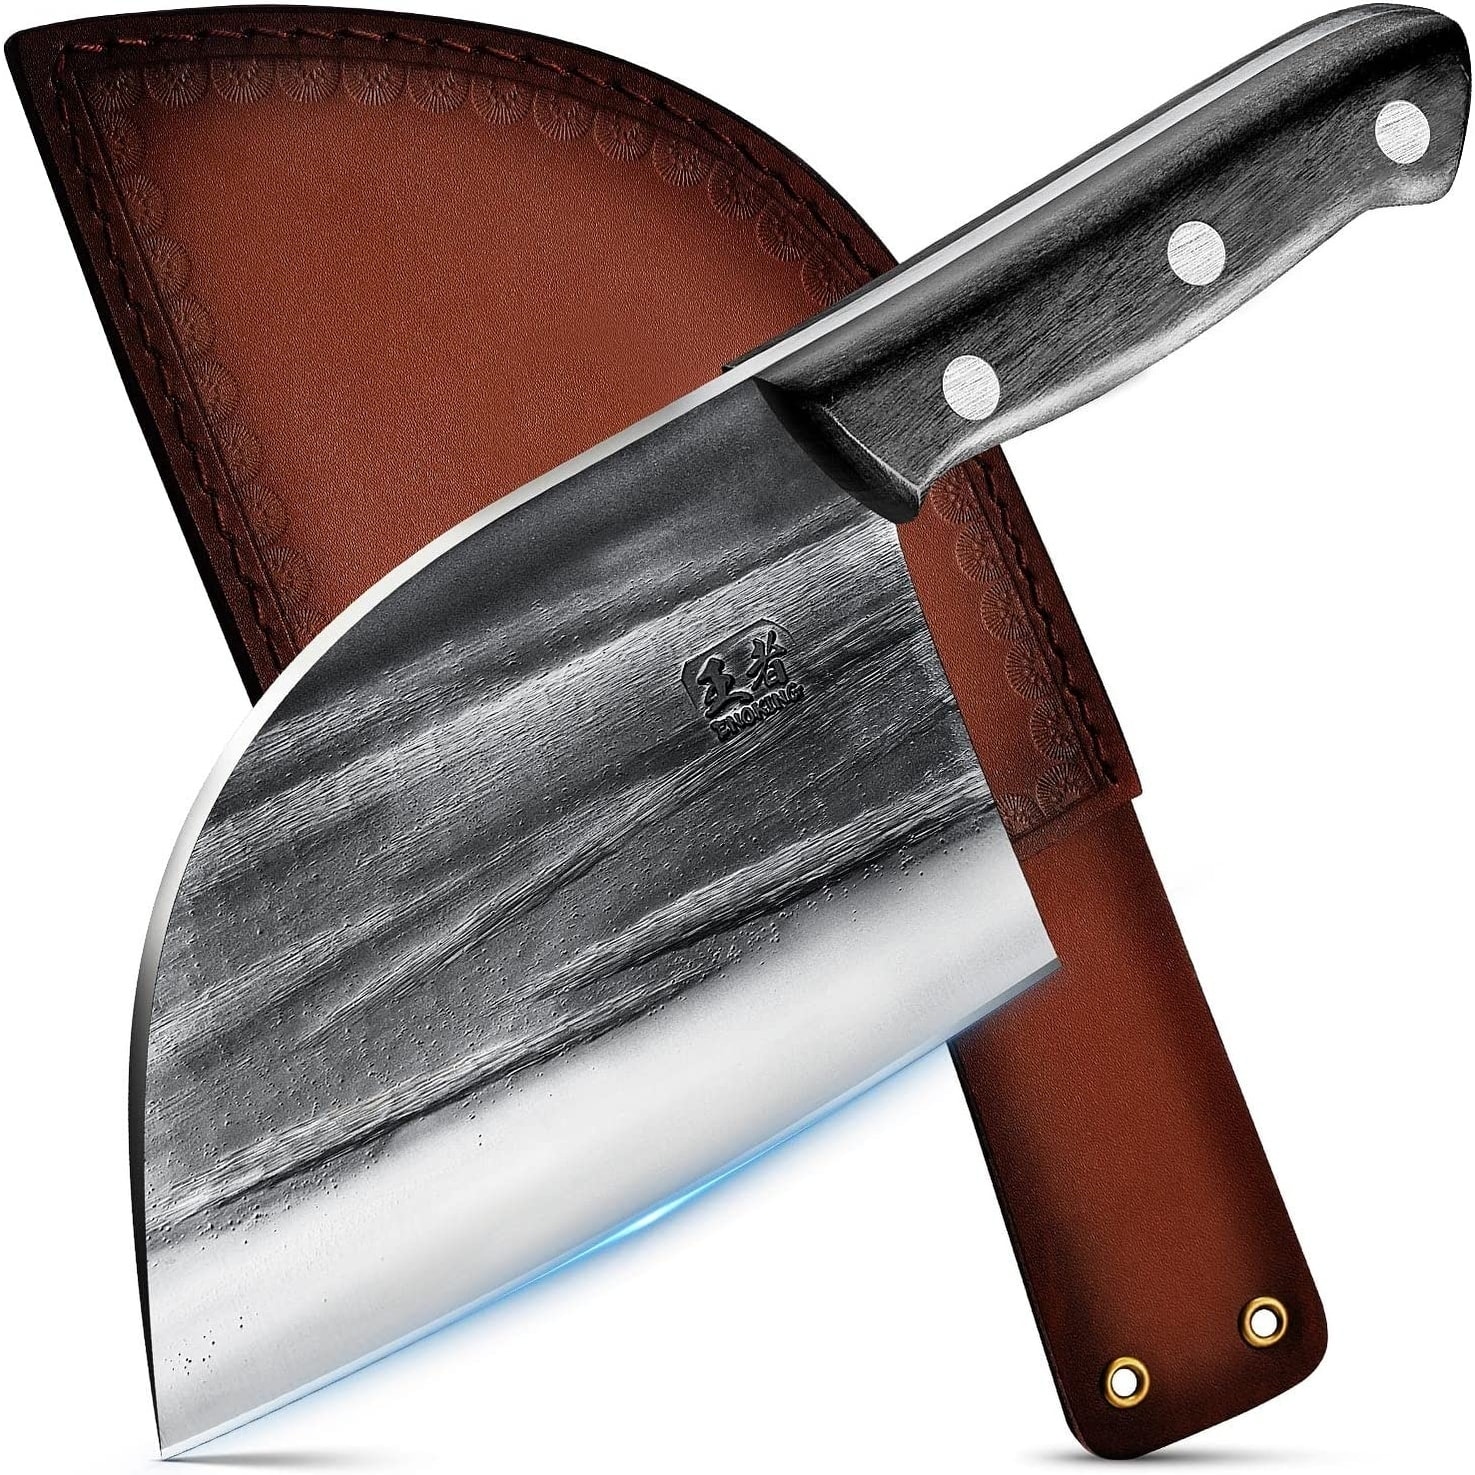 https://ak1.ostkcdn.com/images/products/is/images/direct/d417d706eaace2431deef309775cecec186b44be/ENOKING-Meat-Cleaver-Knife-%286.7%22-Handmade%29.jpg